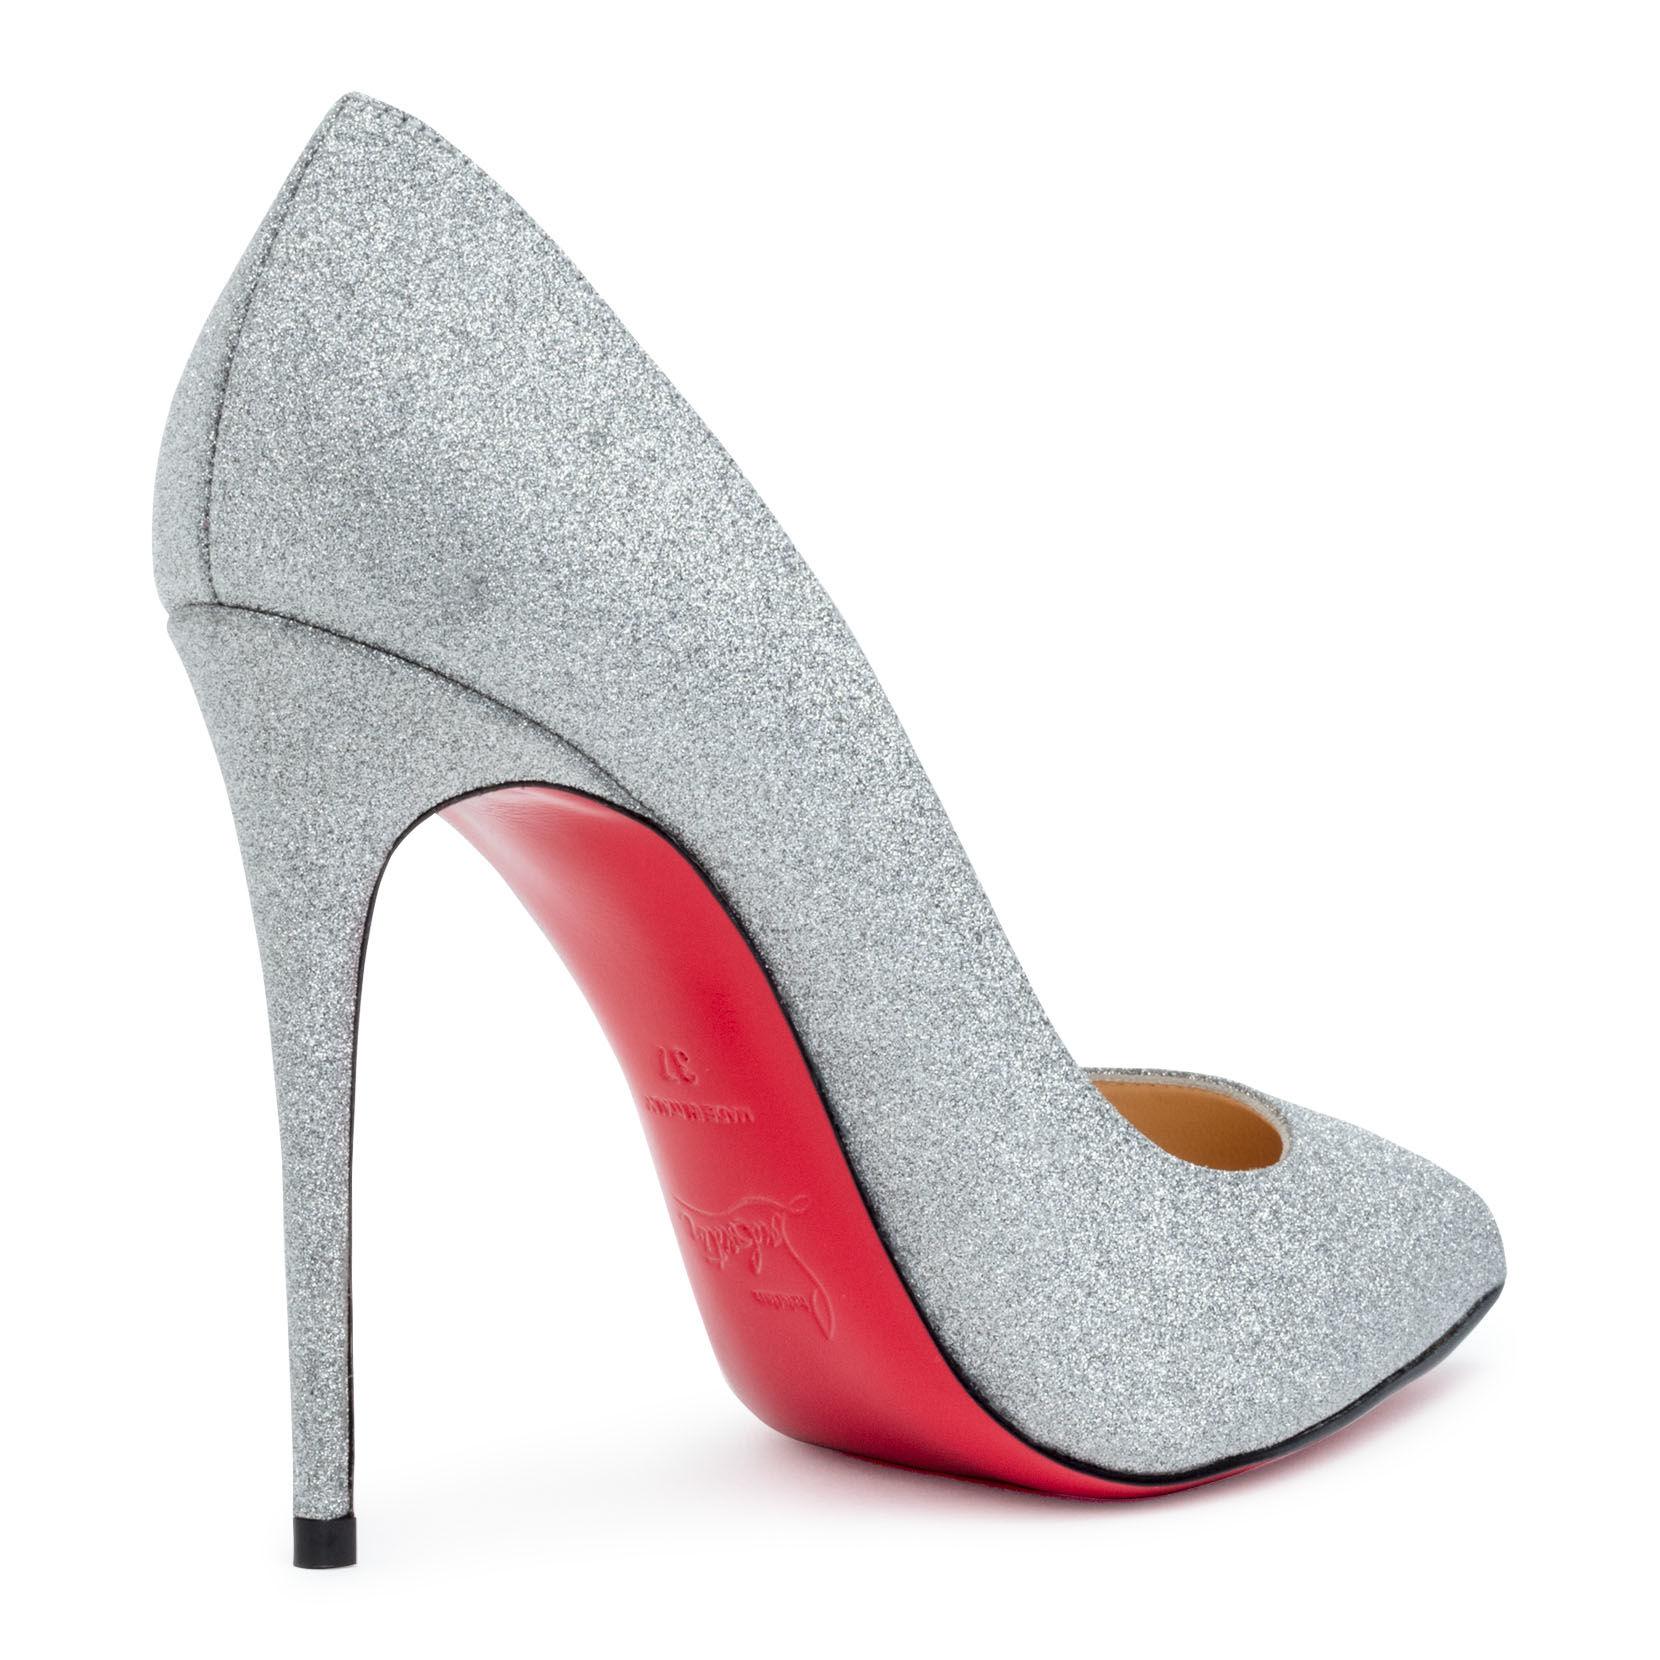 I'm in love with the Louboutin Pigalle Follies Strass 100mm #heels # louboutin #designershoes #luxury 